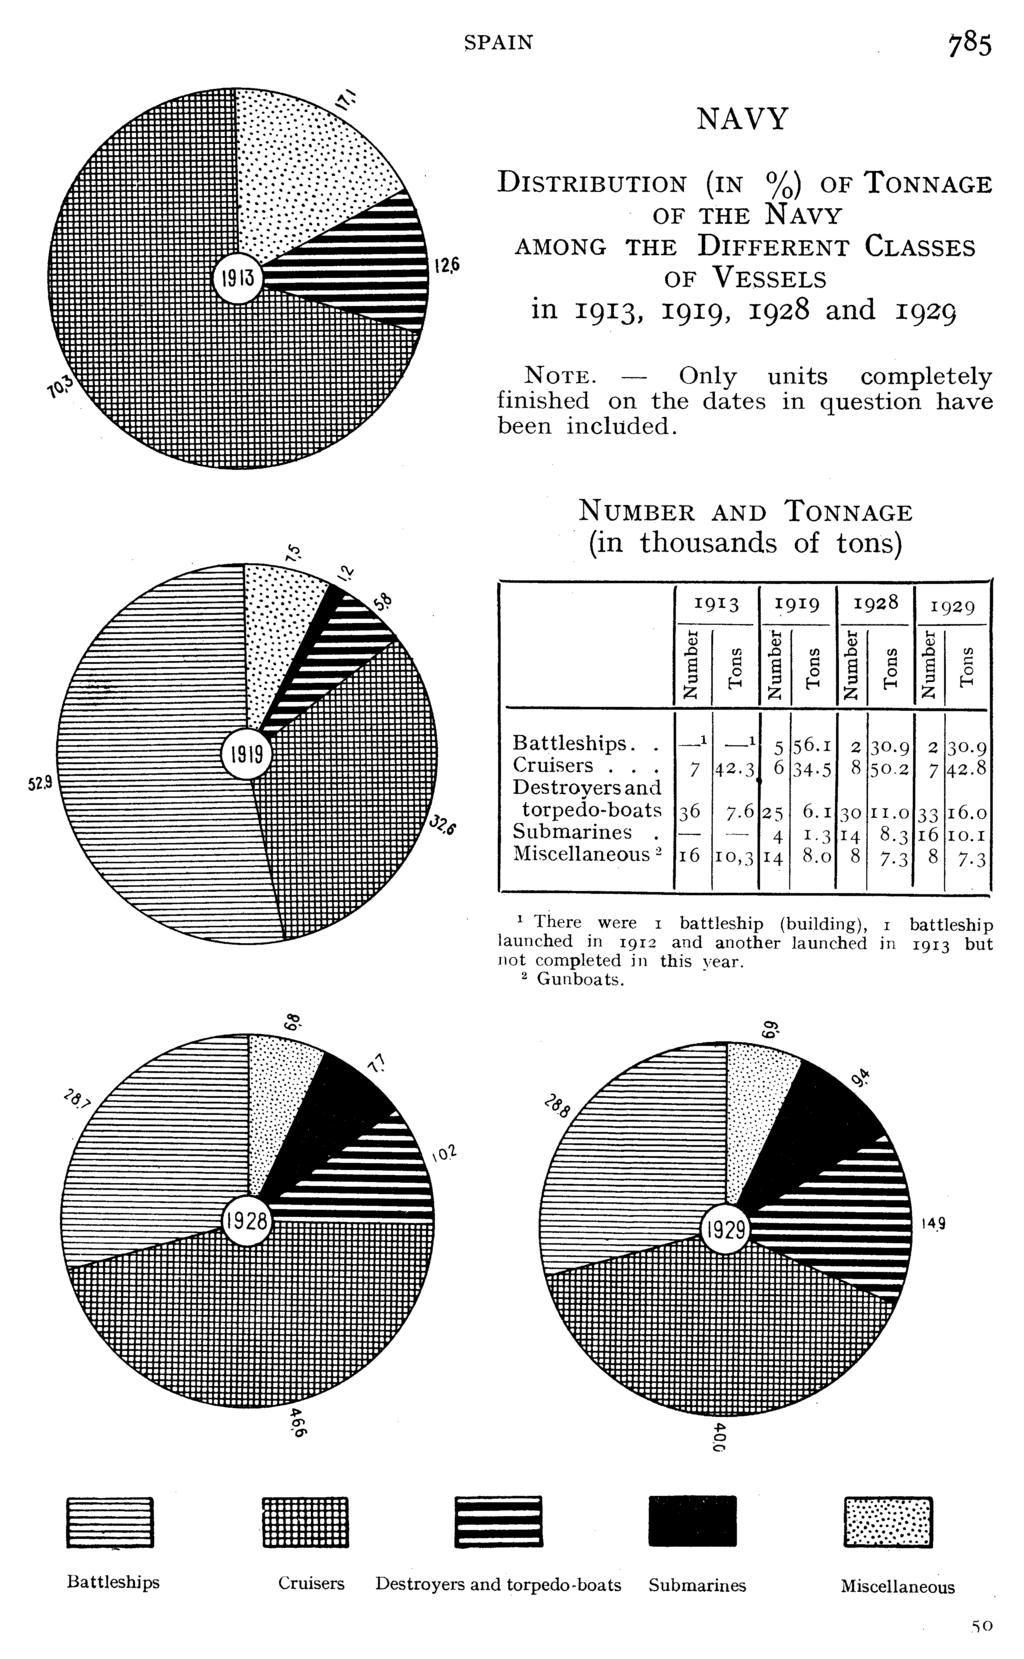 SPAIN 785 NAVY DISTRIBUTION (IN %) OFTONNAGE OF THE NAVY AMONG THE DIFFERENT CLASSES 1913 126 OF VESSELS in I913, 19I9, 1928 and z929 NOTE.